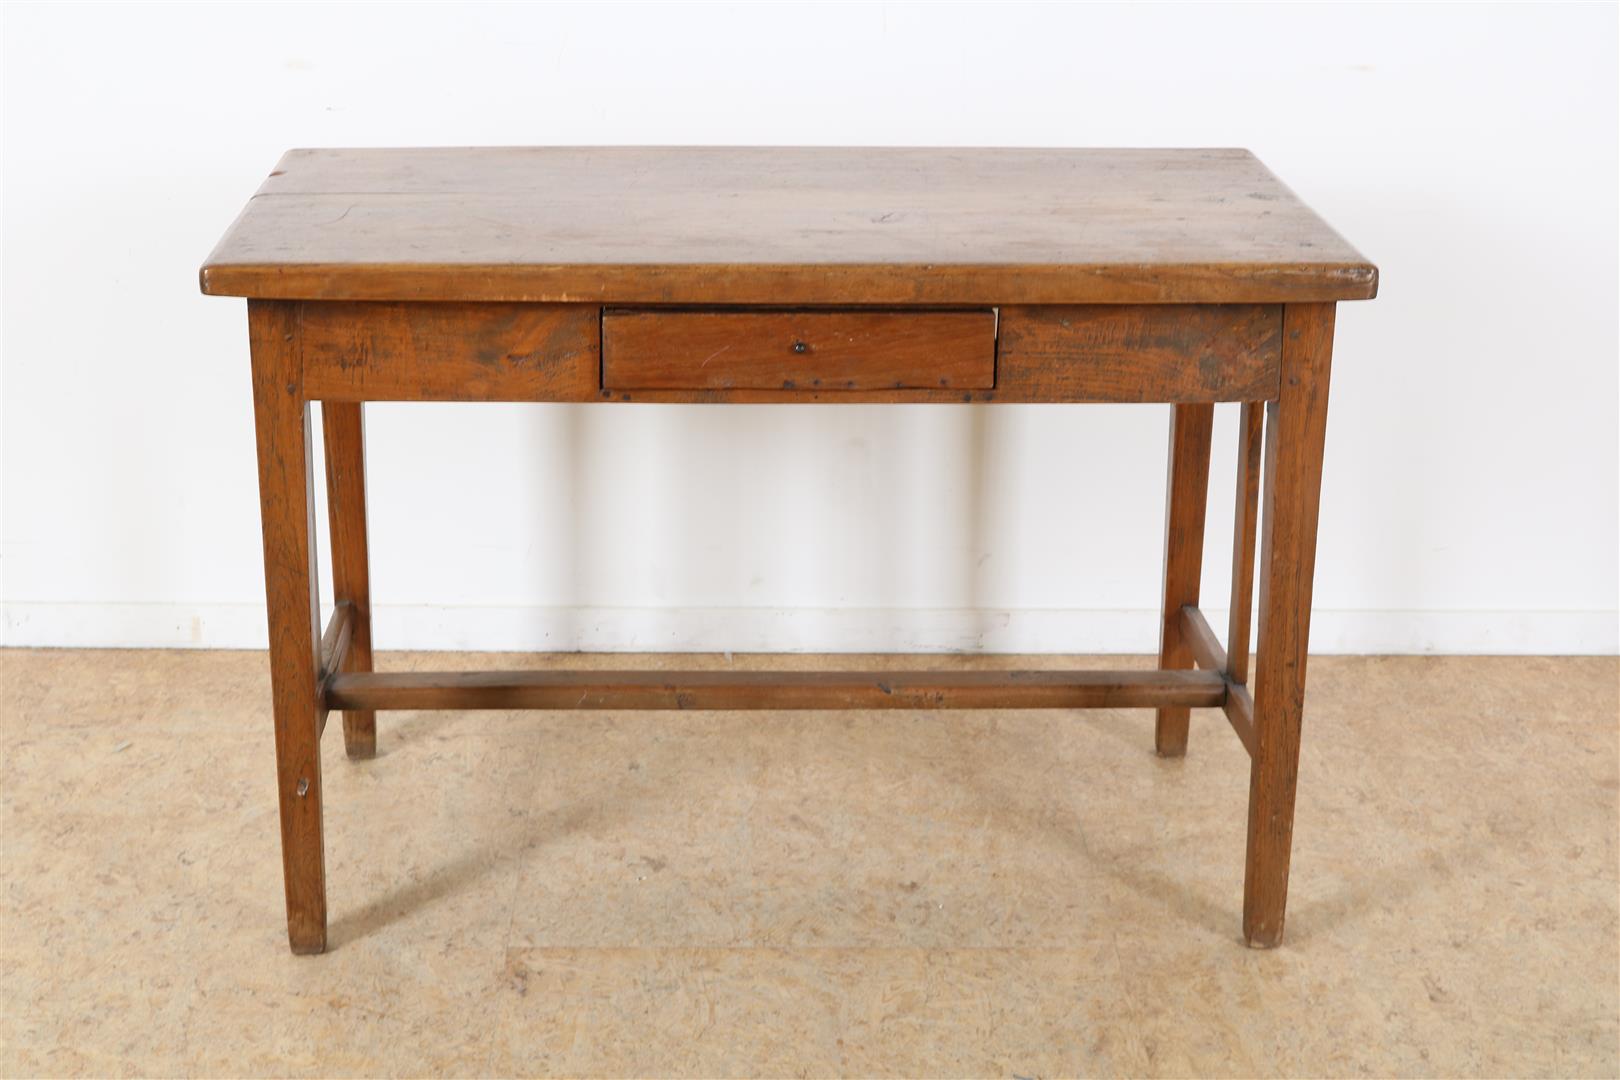 Teak kitchen table with drawer, resting block legs connected by rules, Indonesia, 68 x 103 x 57 cm.